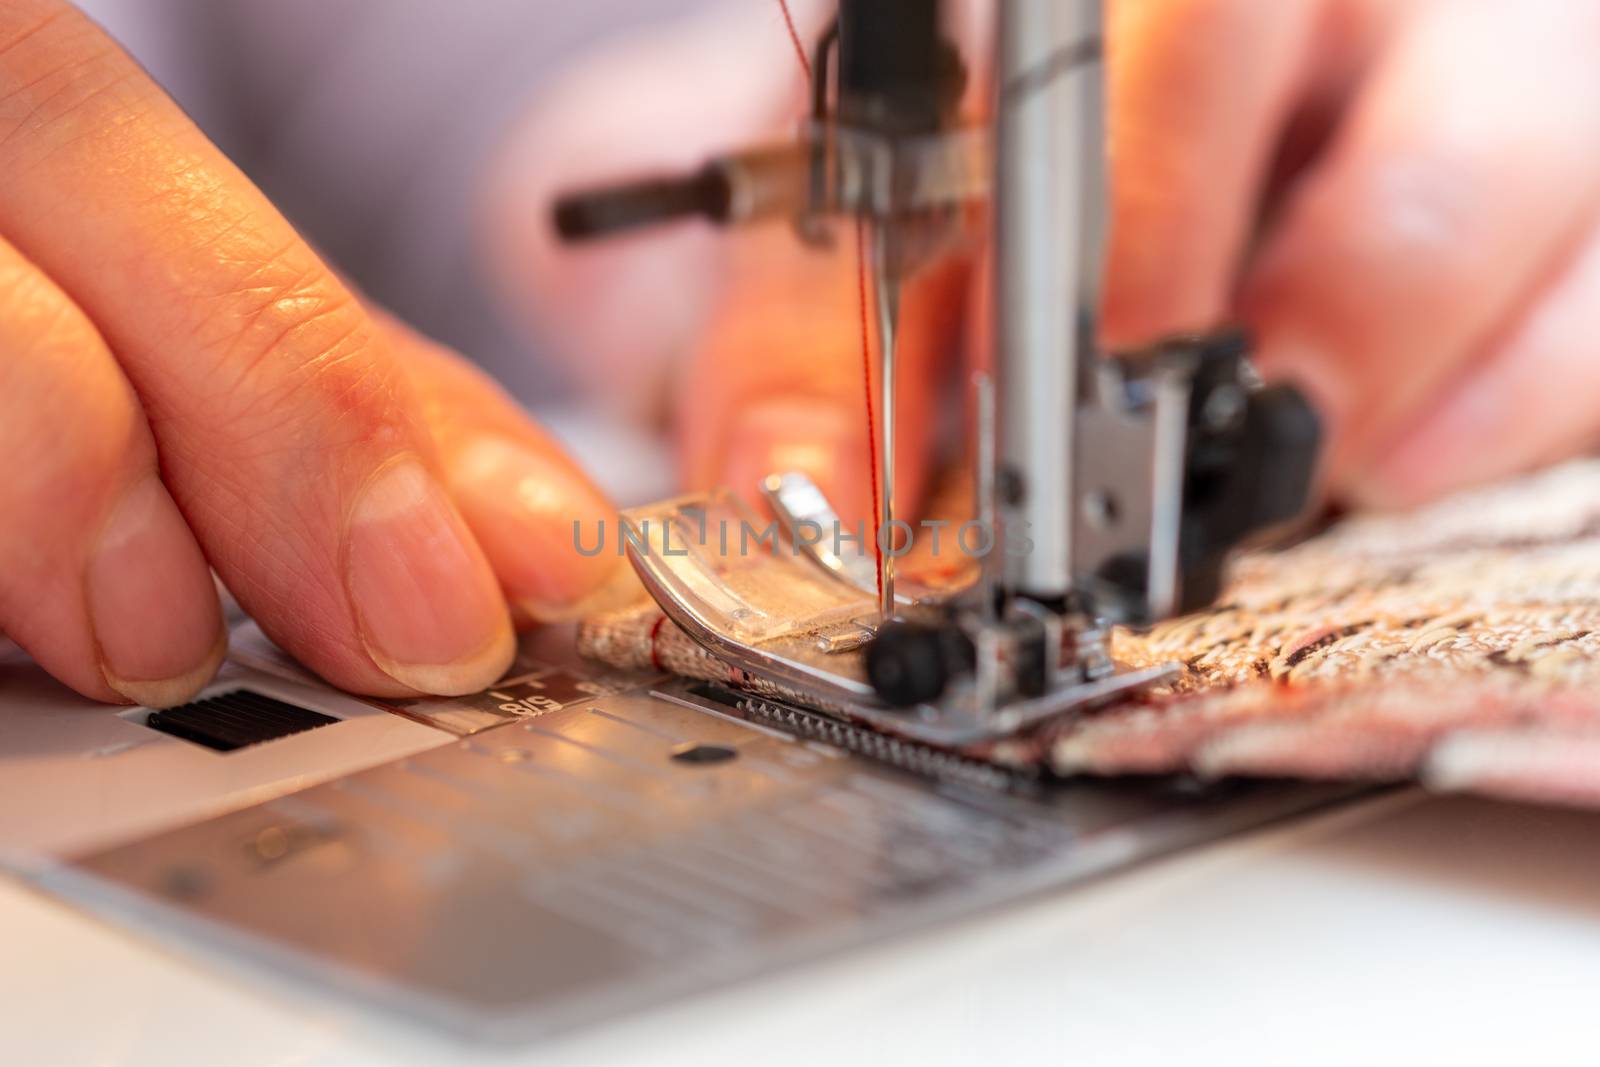 a close-up view of sewing process, hand of old woman using sewing machine, selective focus technique by z1b